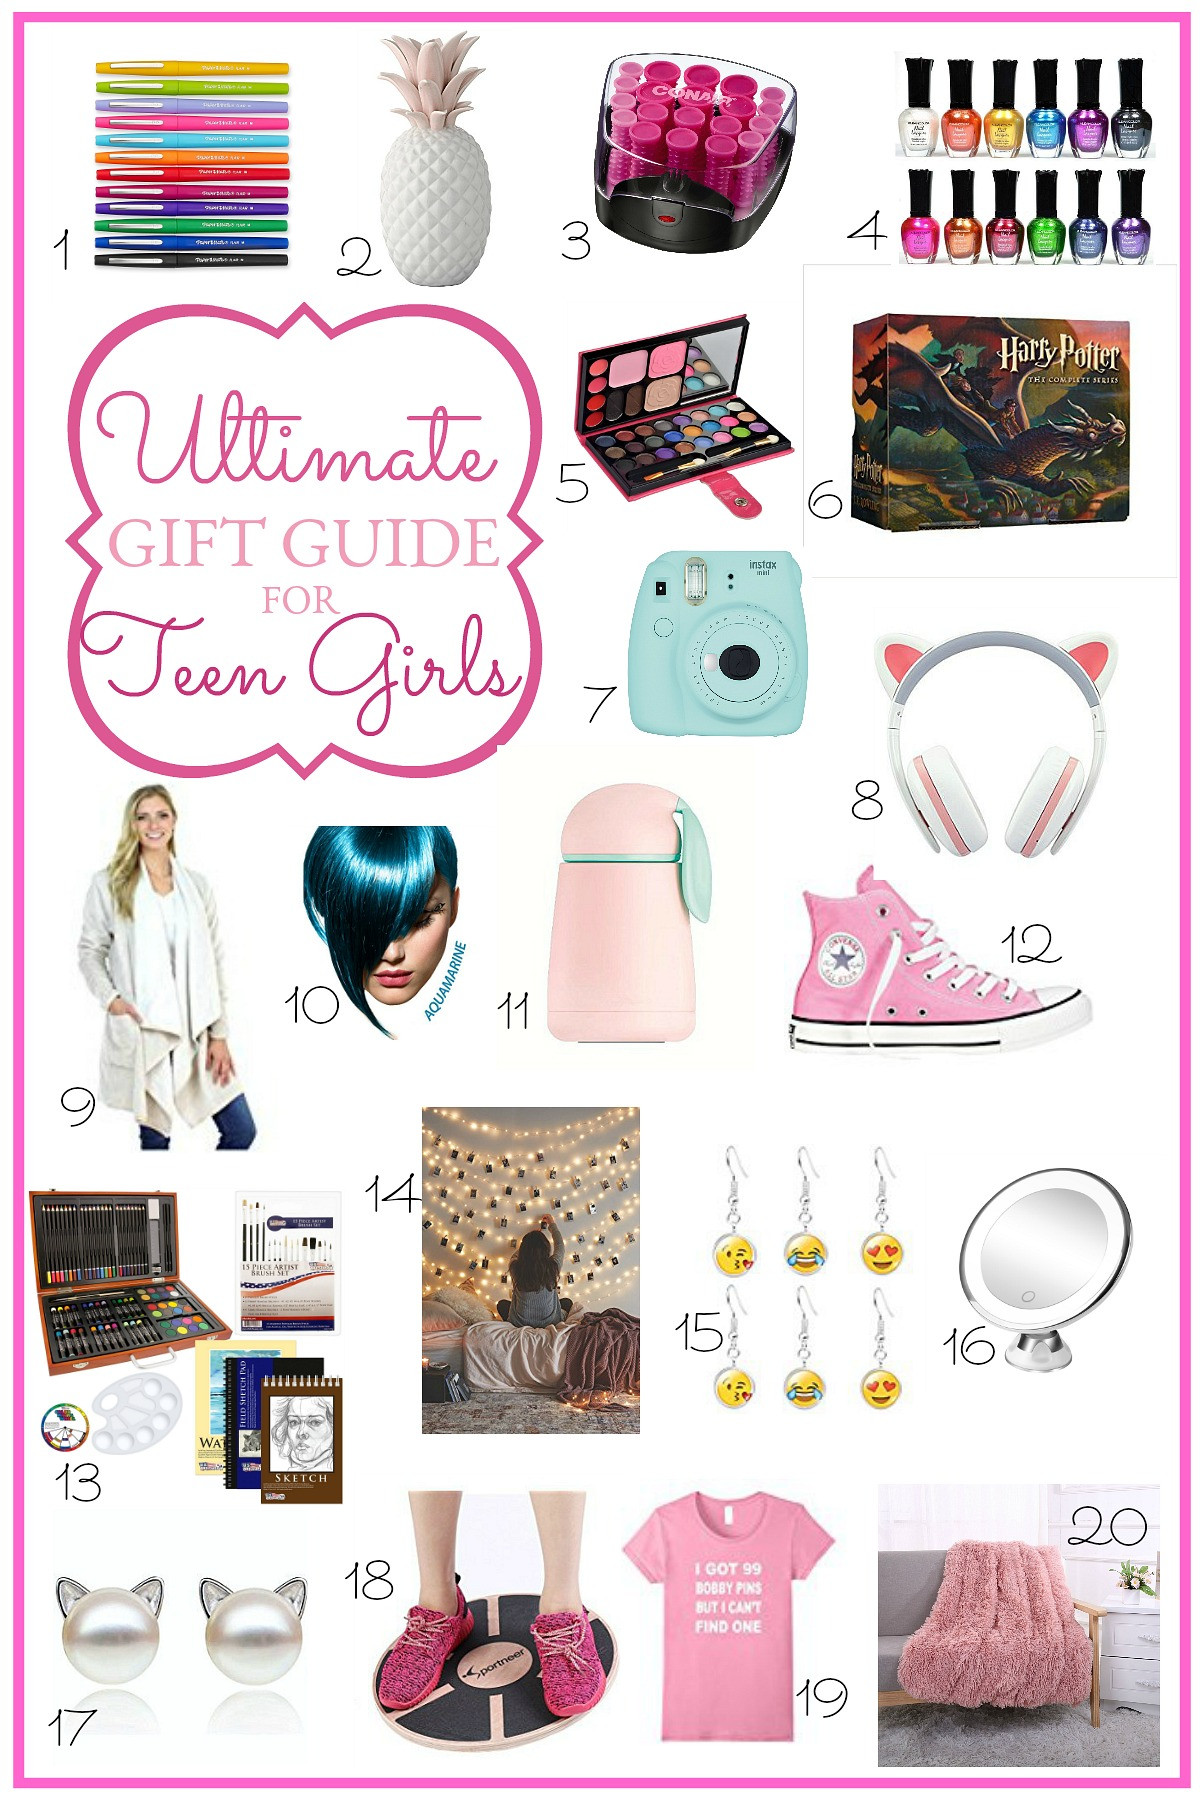 Teen Girls Gift Ideas
 Ultimate Holiday Gift Guide for Teen Girls